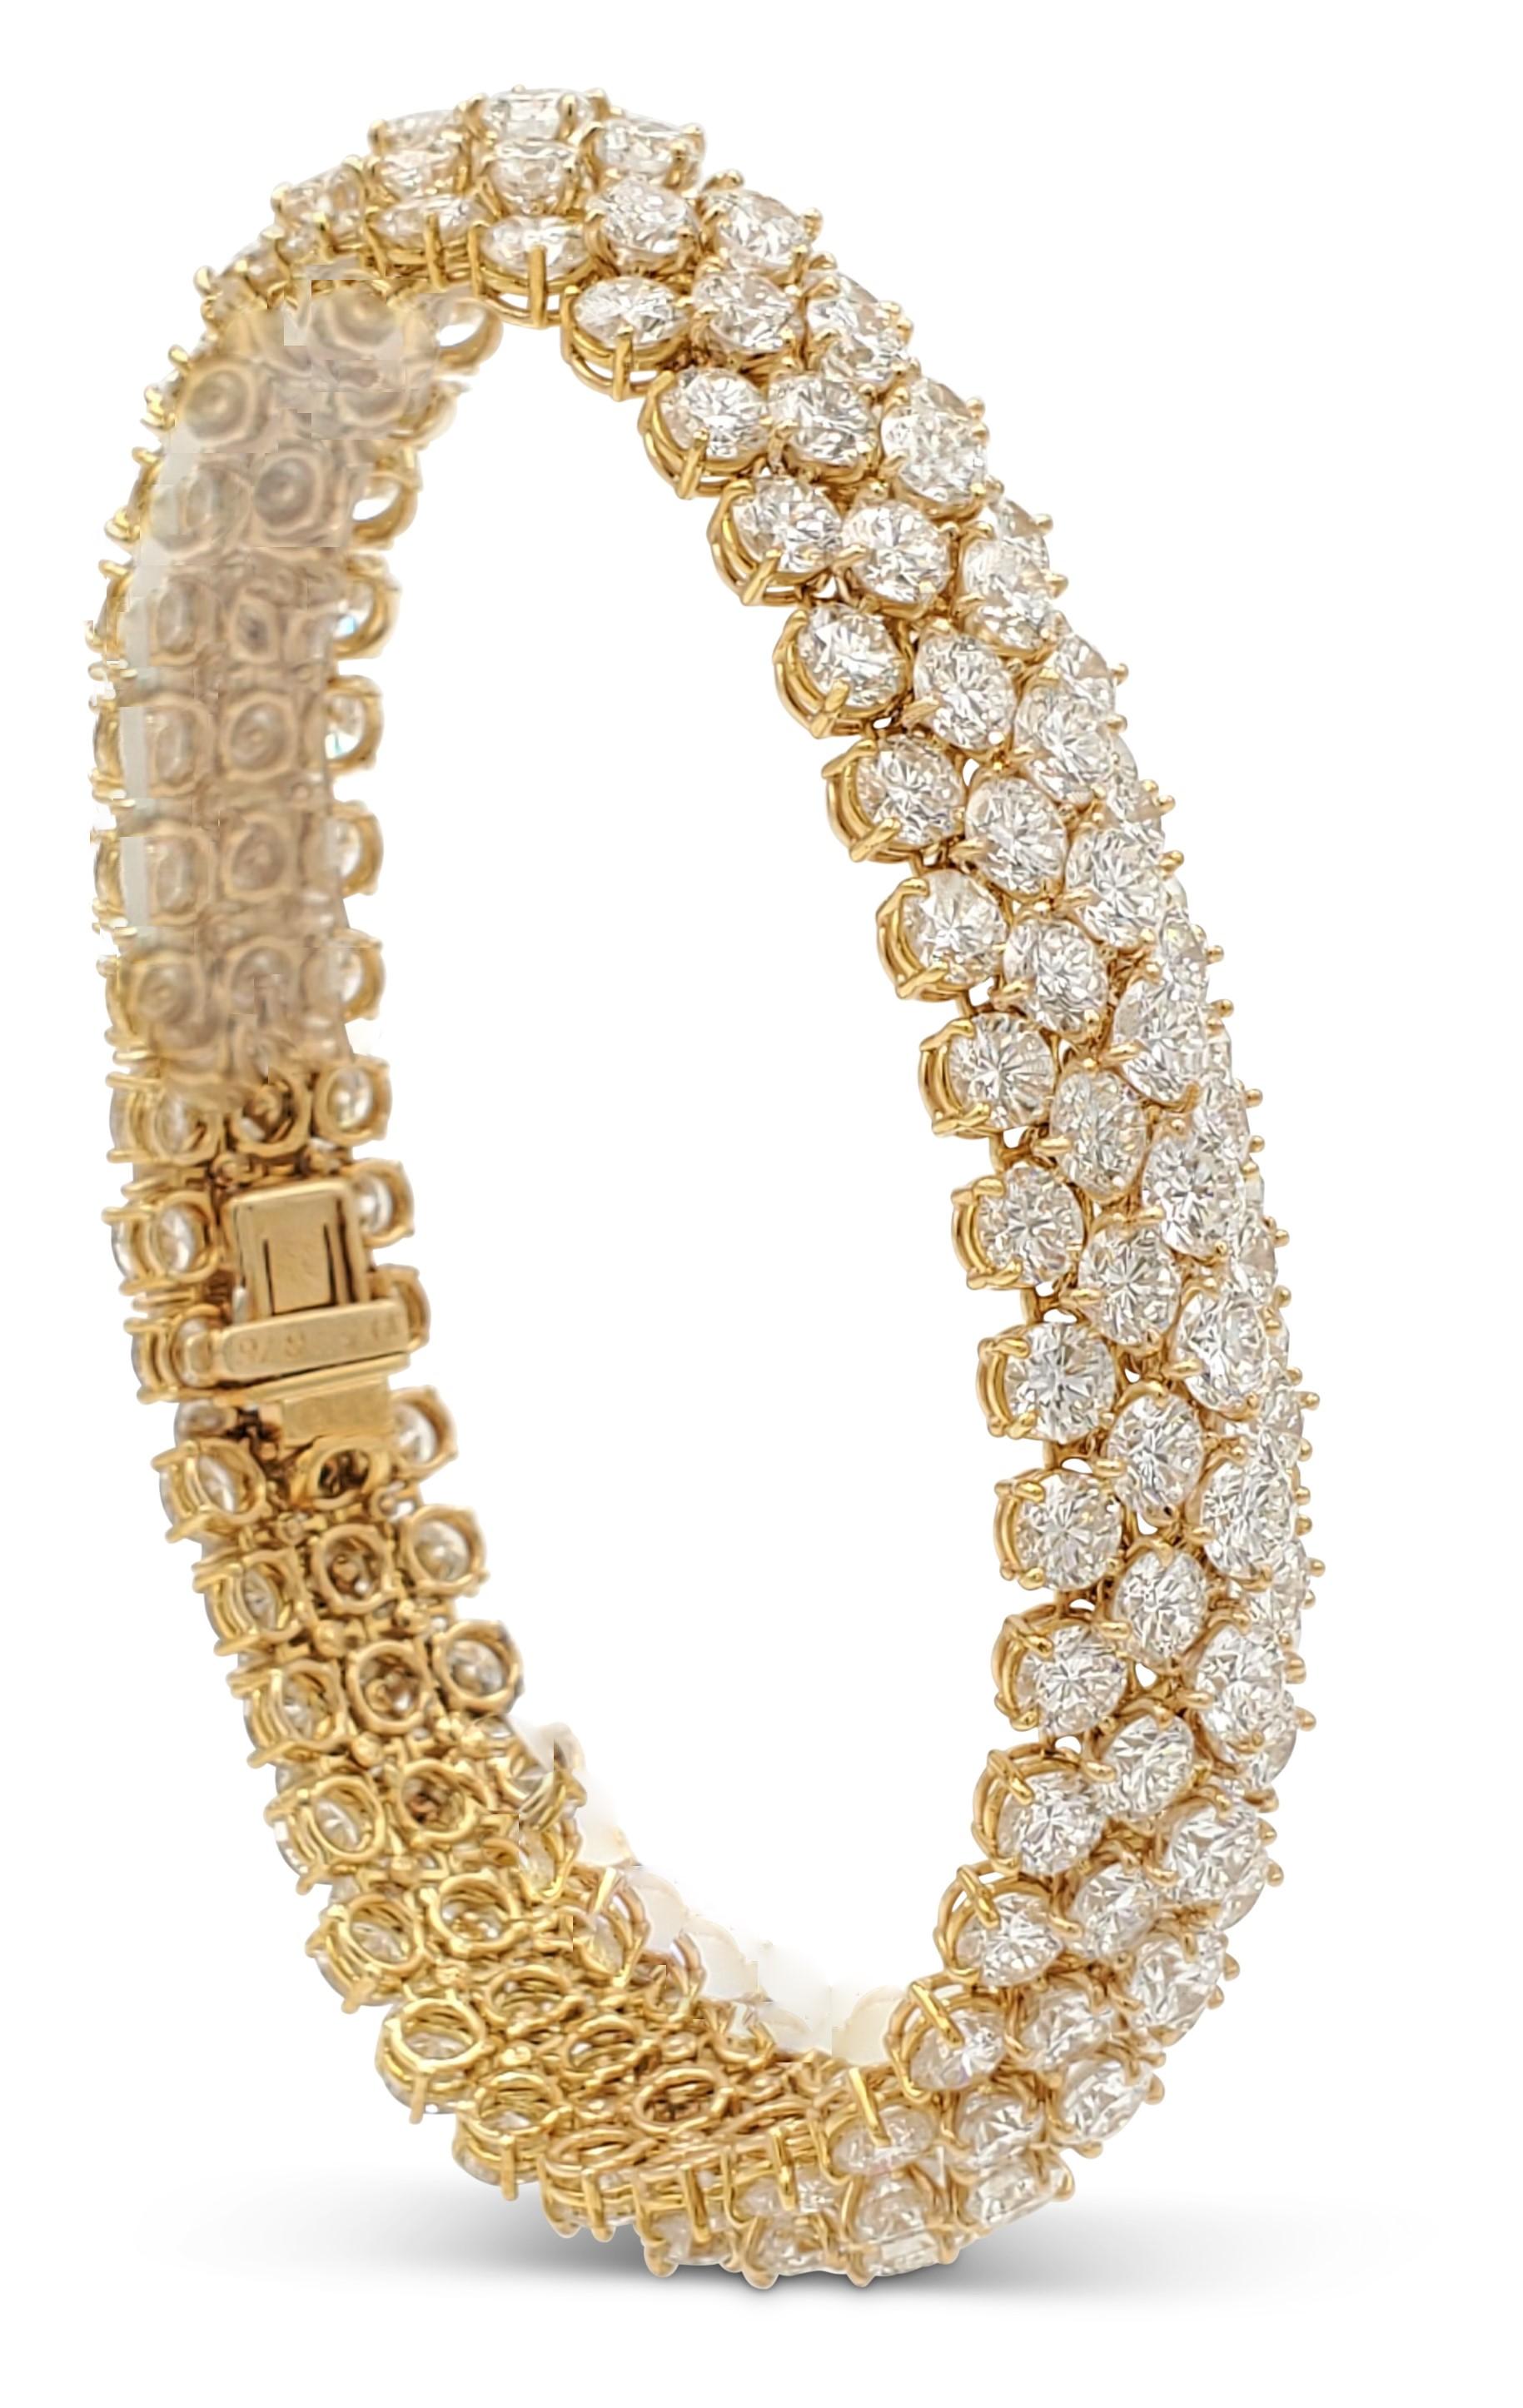 Impressive Van Cleef & Arpels Á Cheval five-row diamond bracelet crafted in 18 karat yellow gold and set with an estimated 51.0 carats of high-quality round brilliant cut diamonds (E-F color, VS clarity). Signed VCA, with serial number and